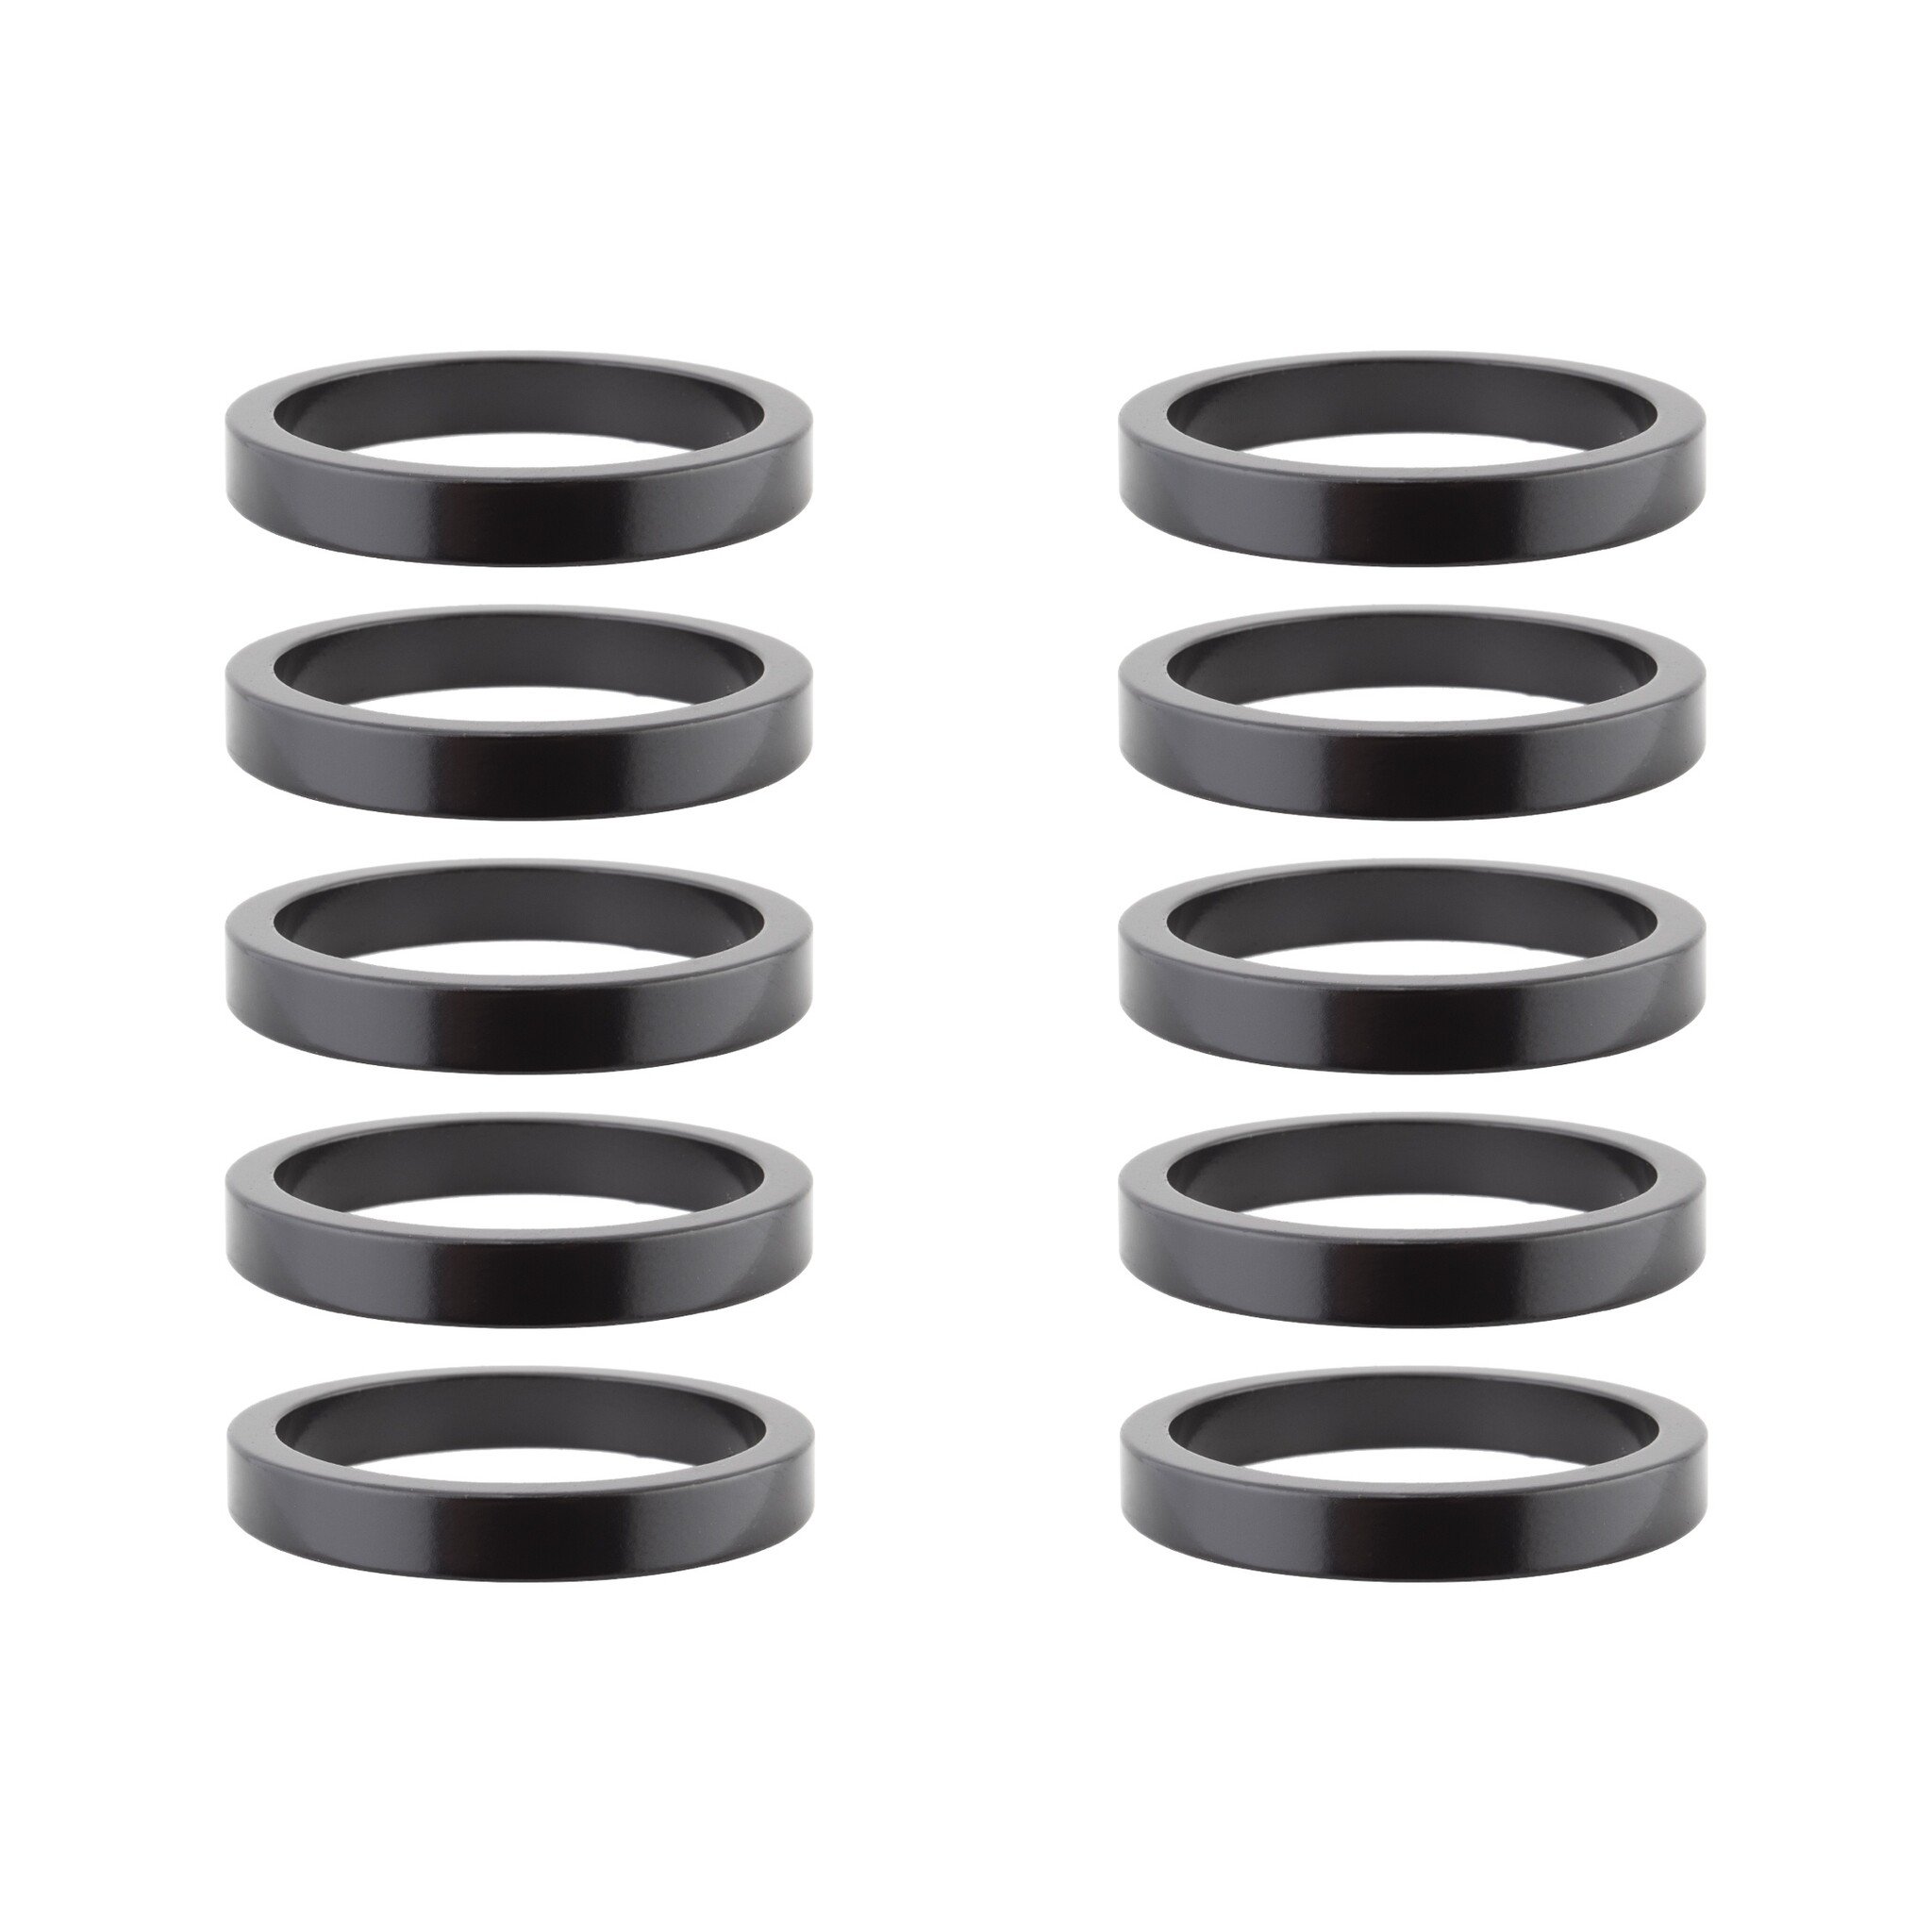 Vp components 484109442 headset spacer 1 1 8 anodized aluminium 20mm